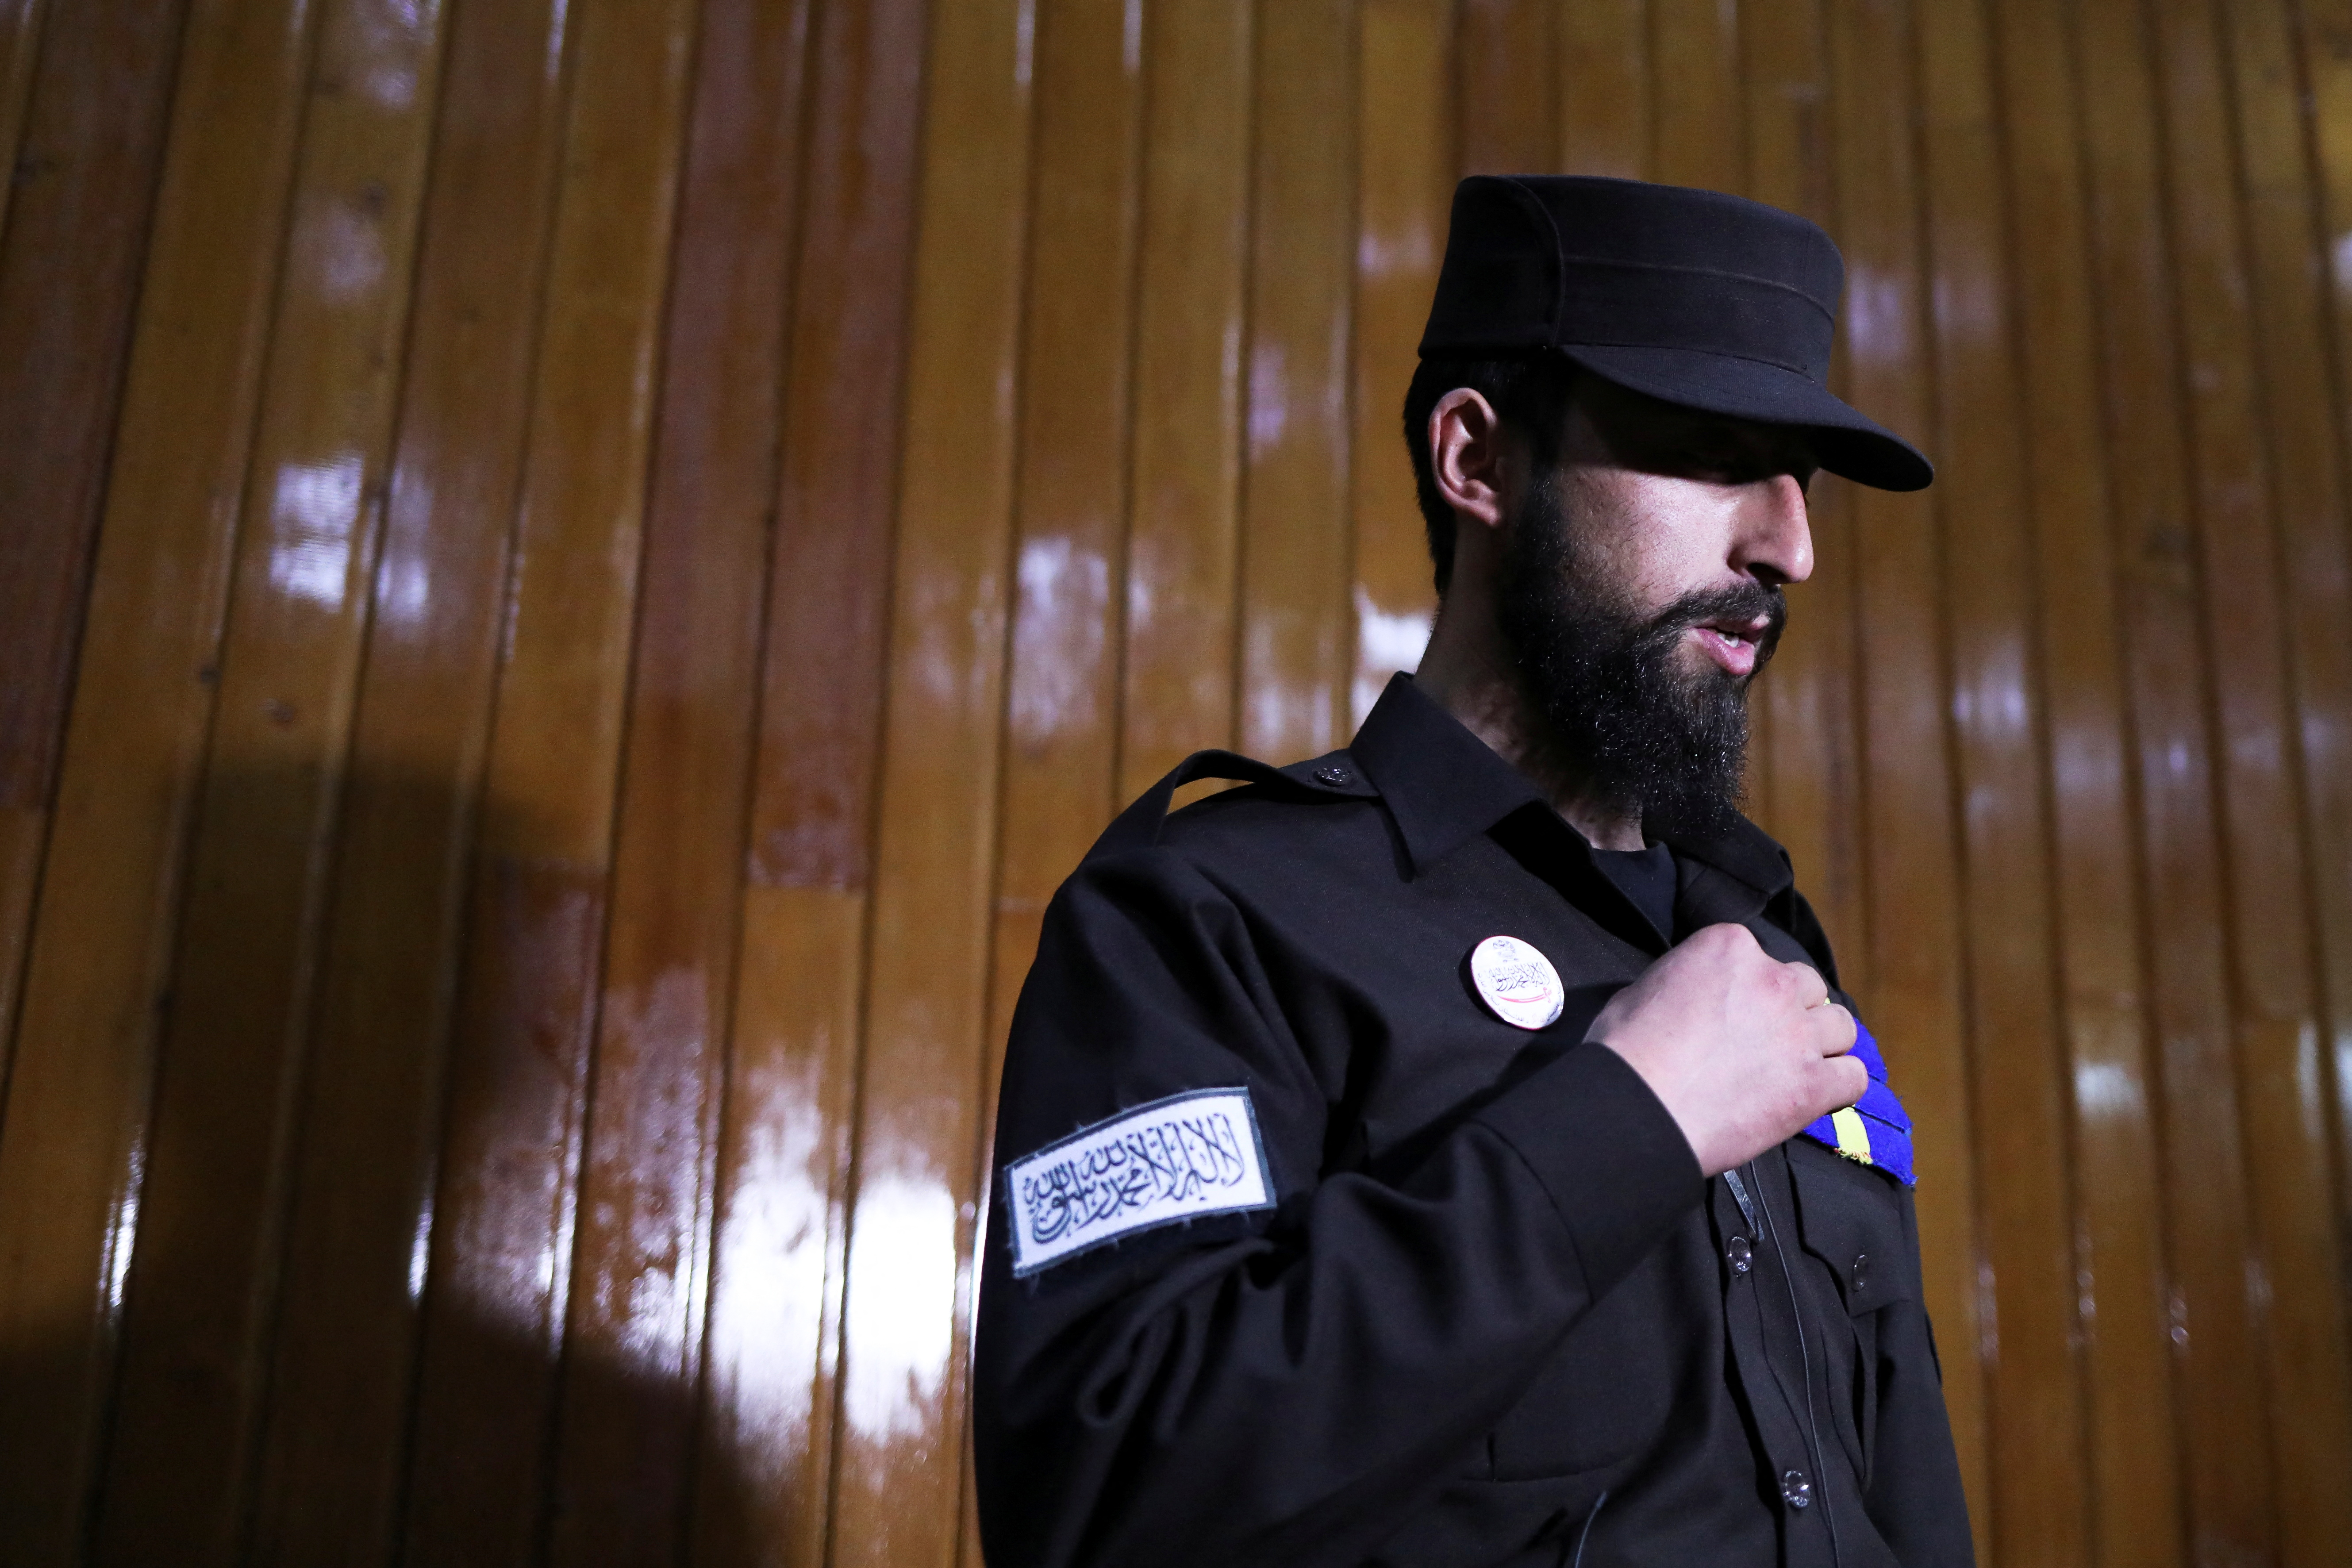 News conference about the new Afghan police uniform in Kabul